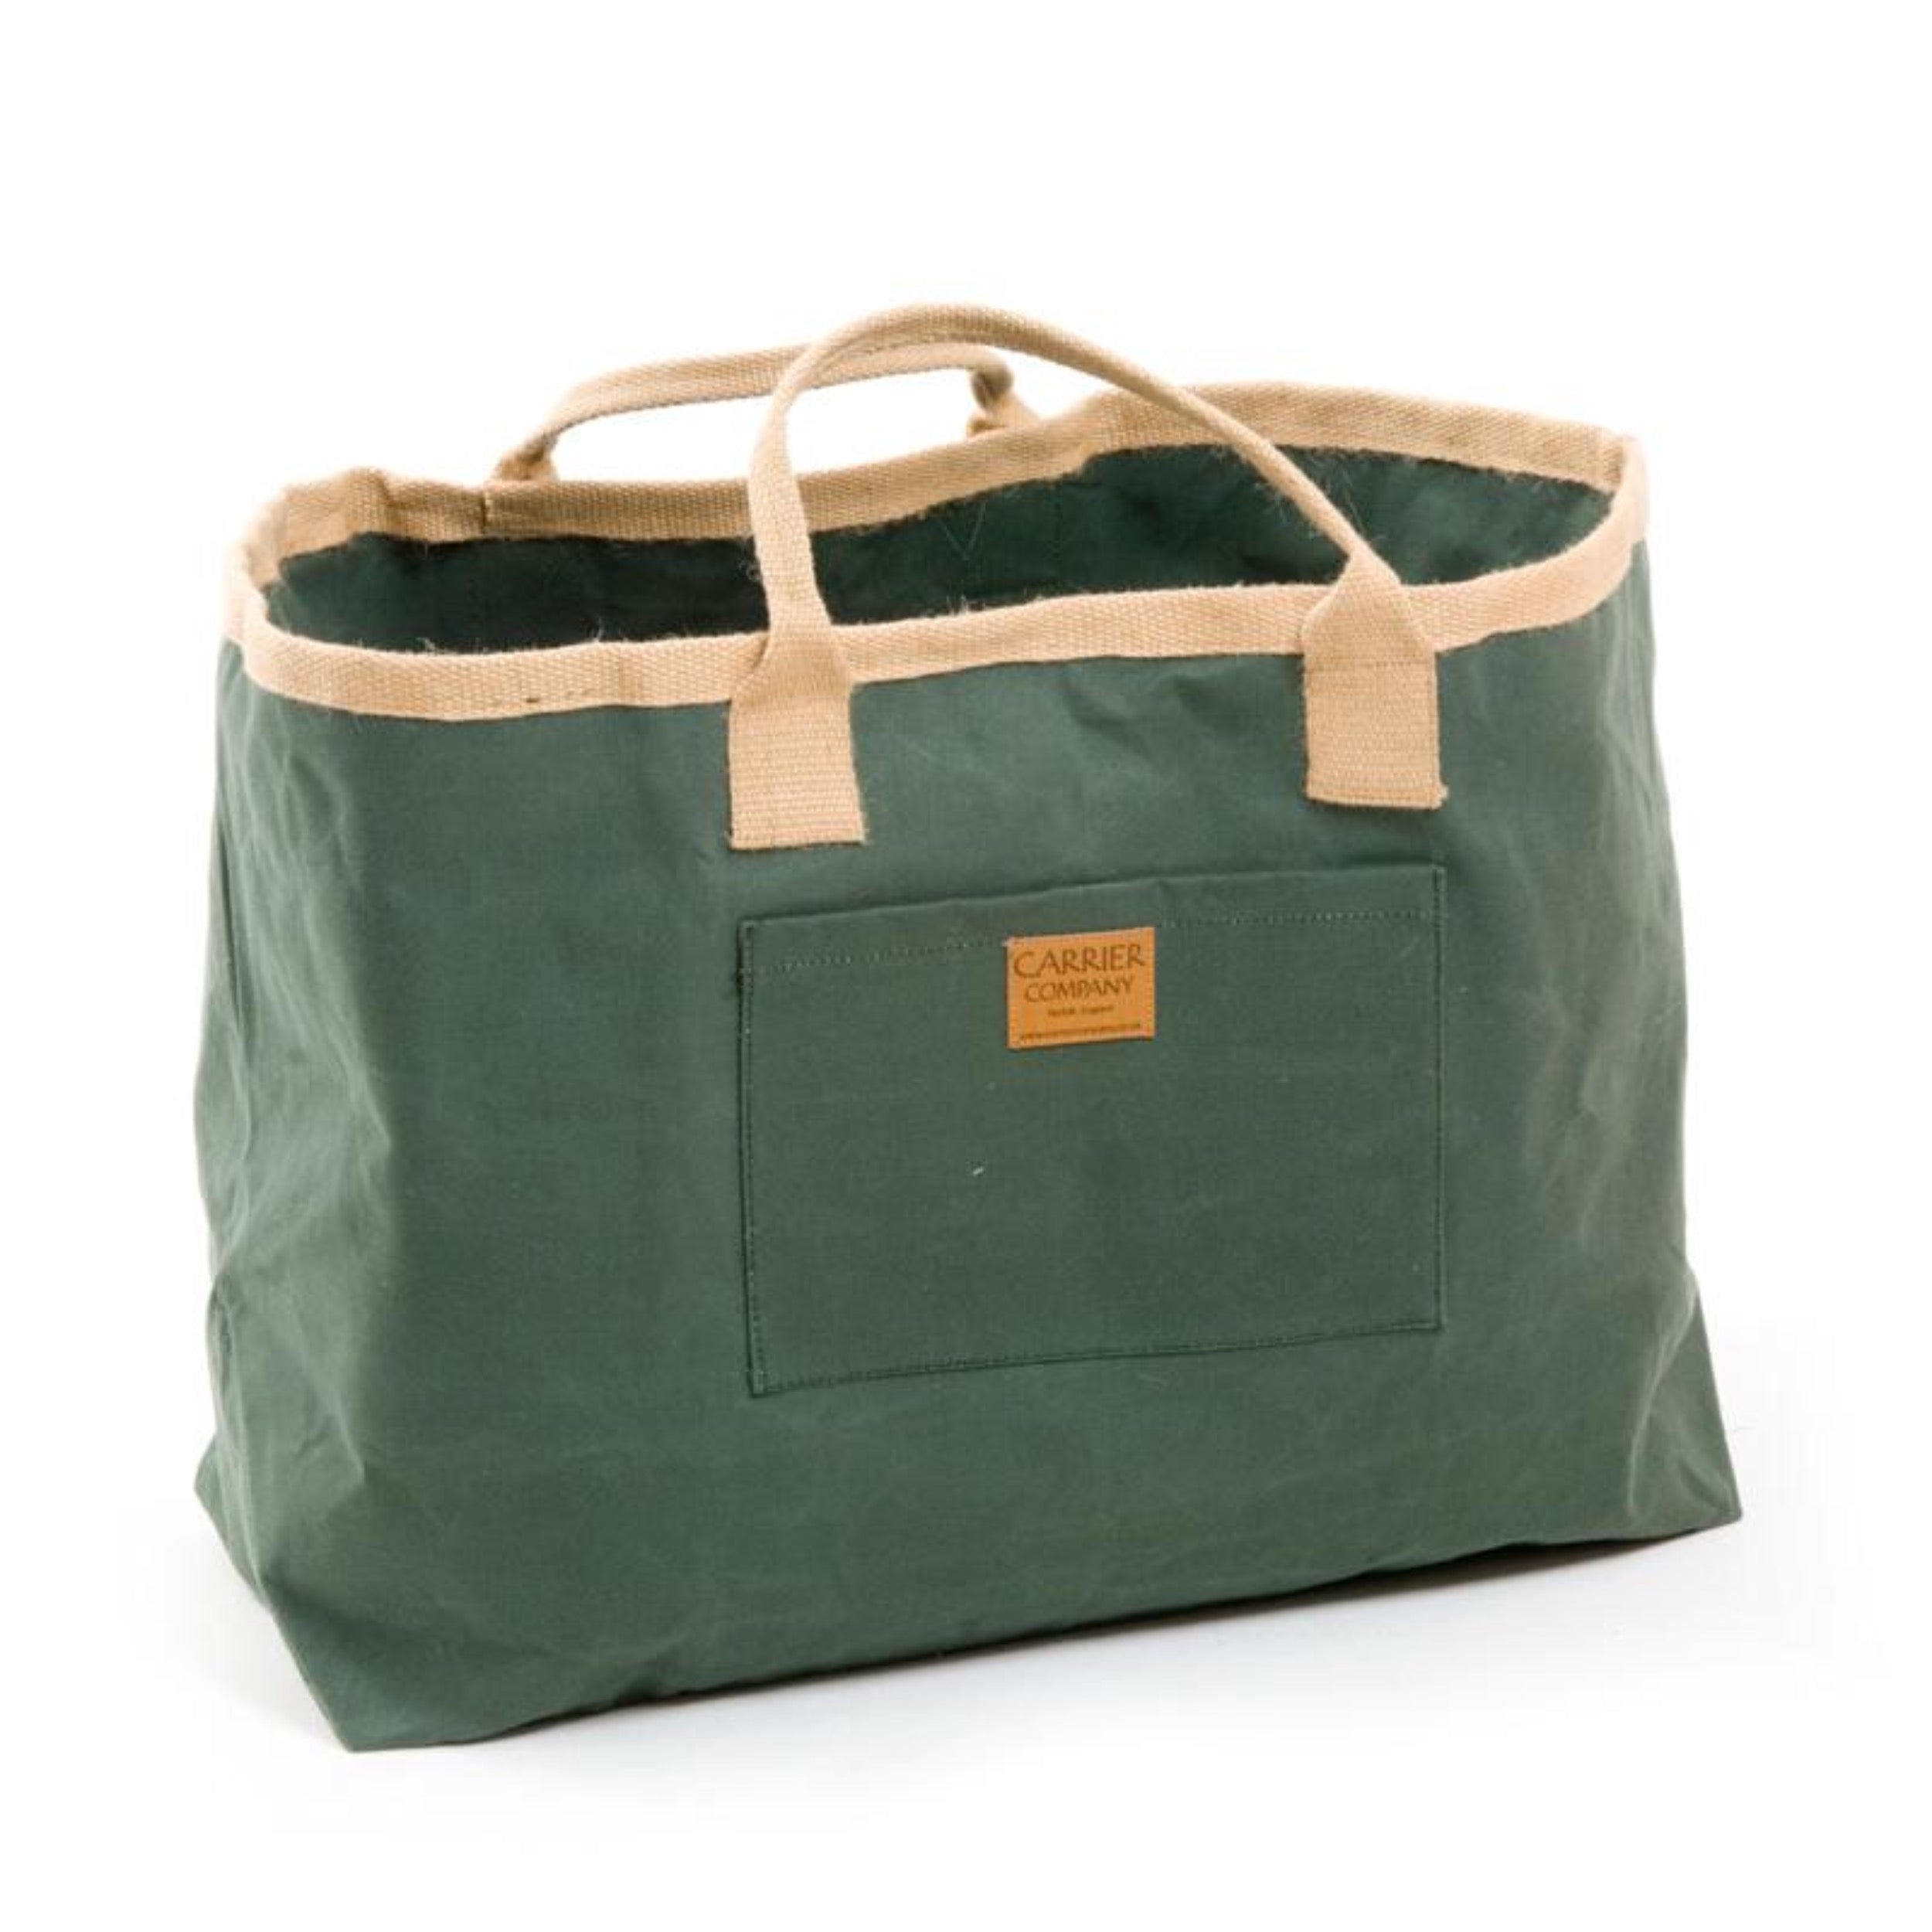 Carrier Company Big Boot Bag in Spruce Green